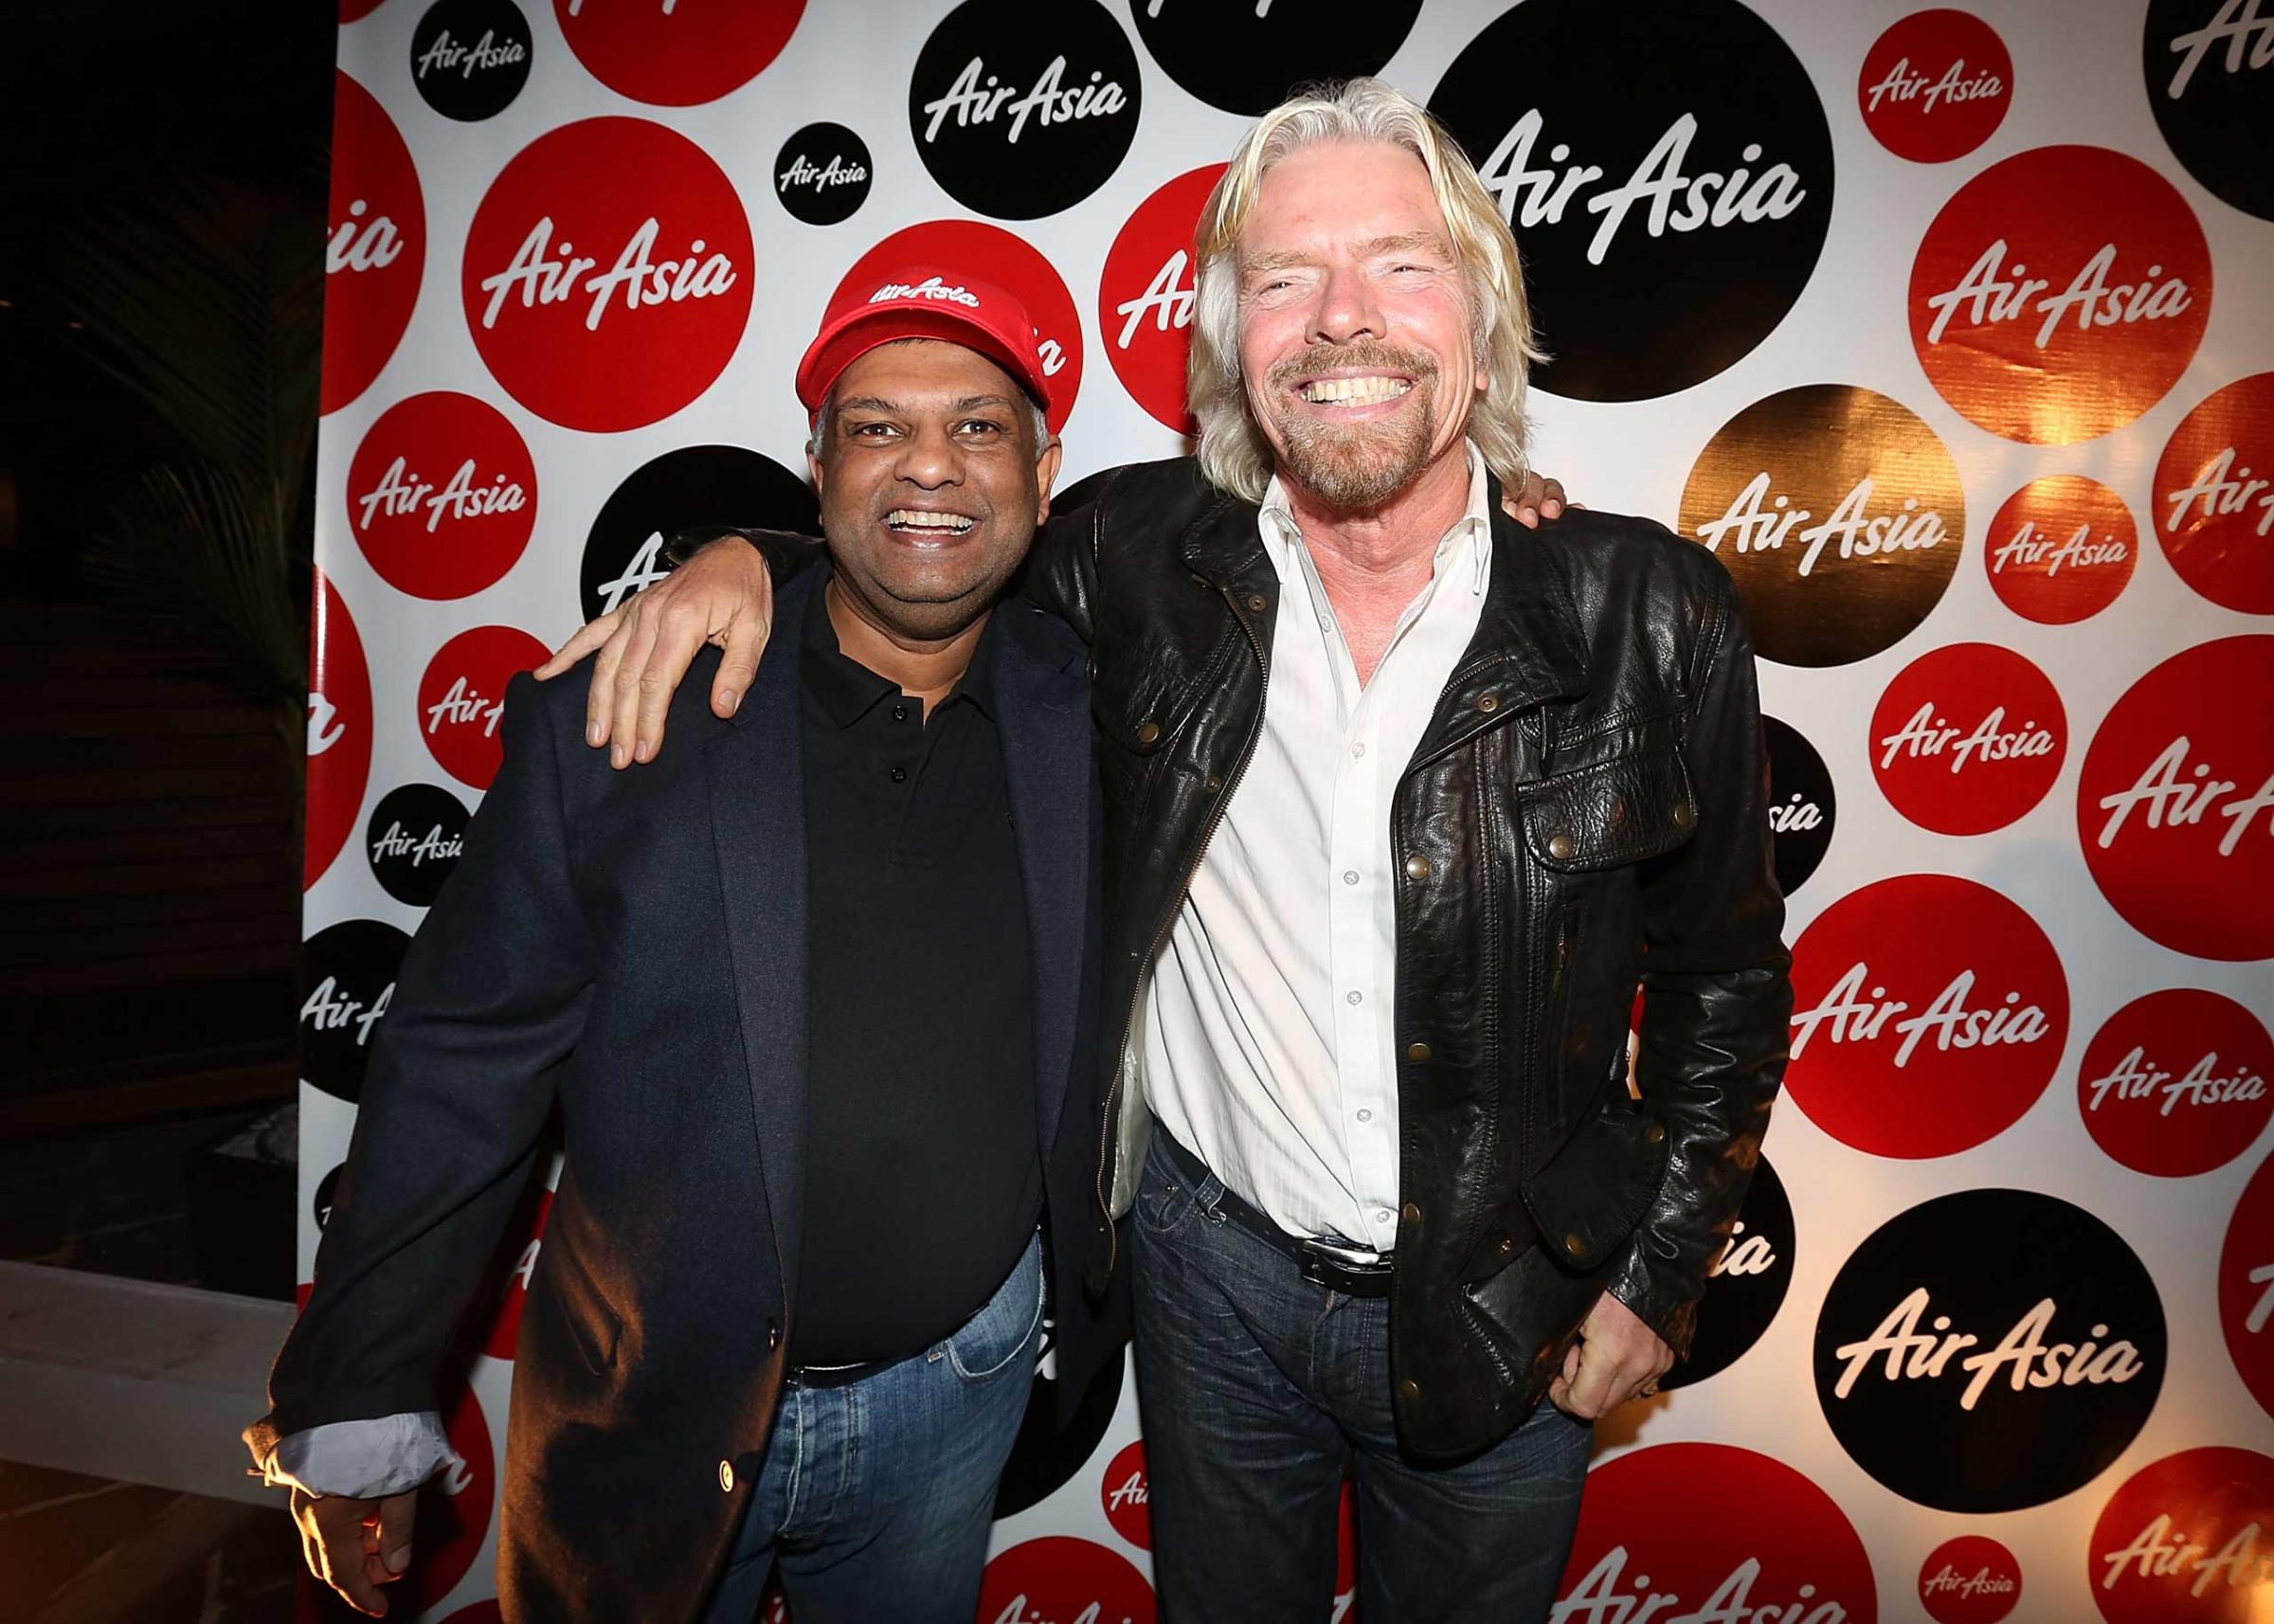 Tony Fernandes, Sir Richard Branson Attends AirAsia Cocktail Party